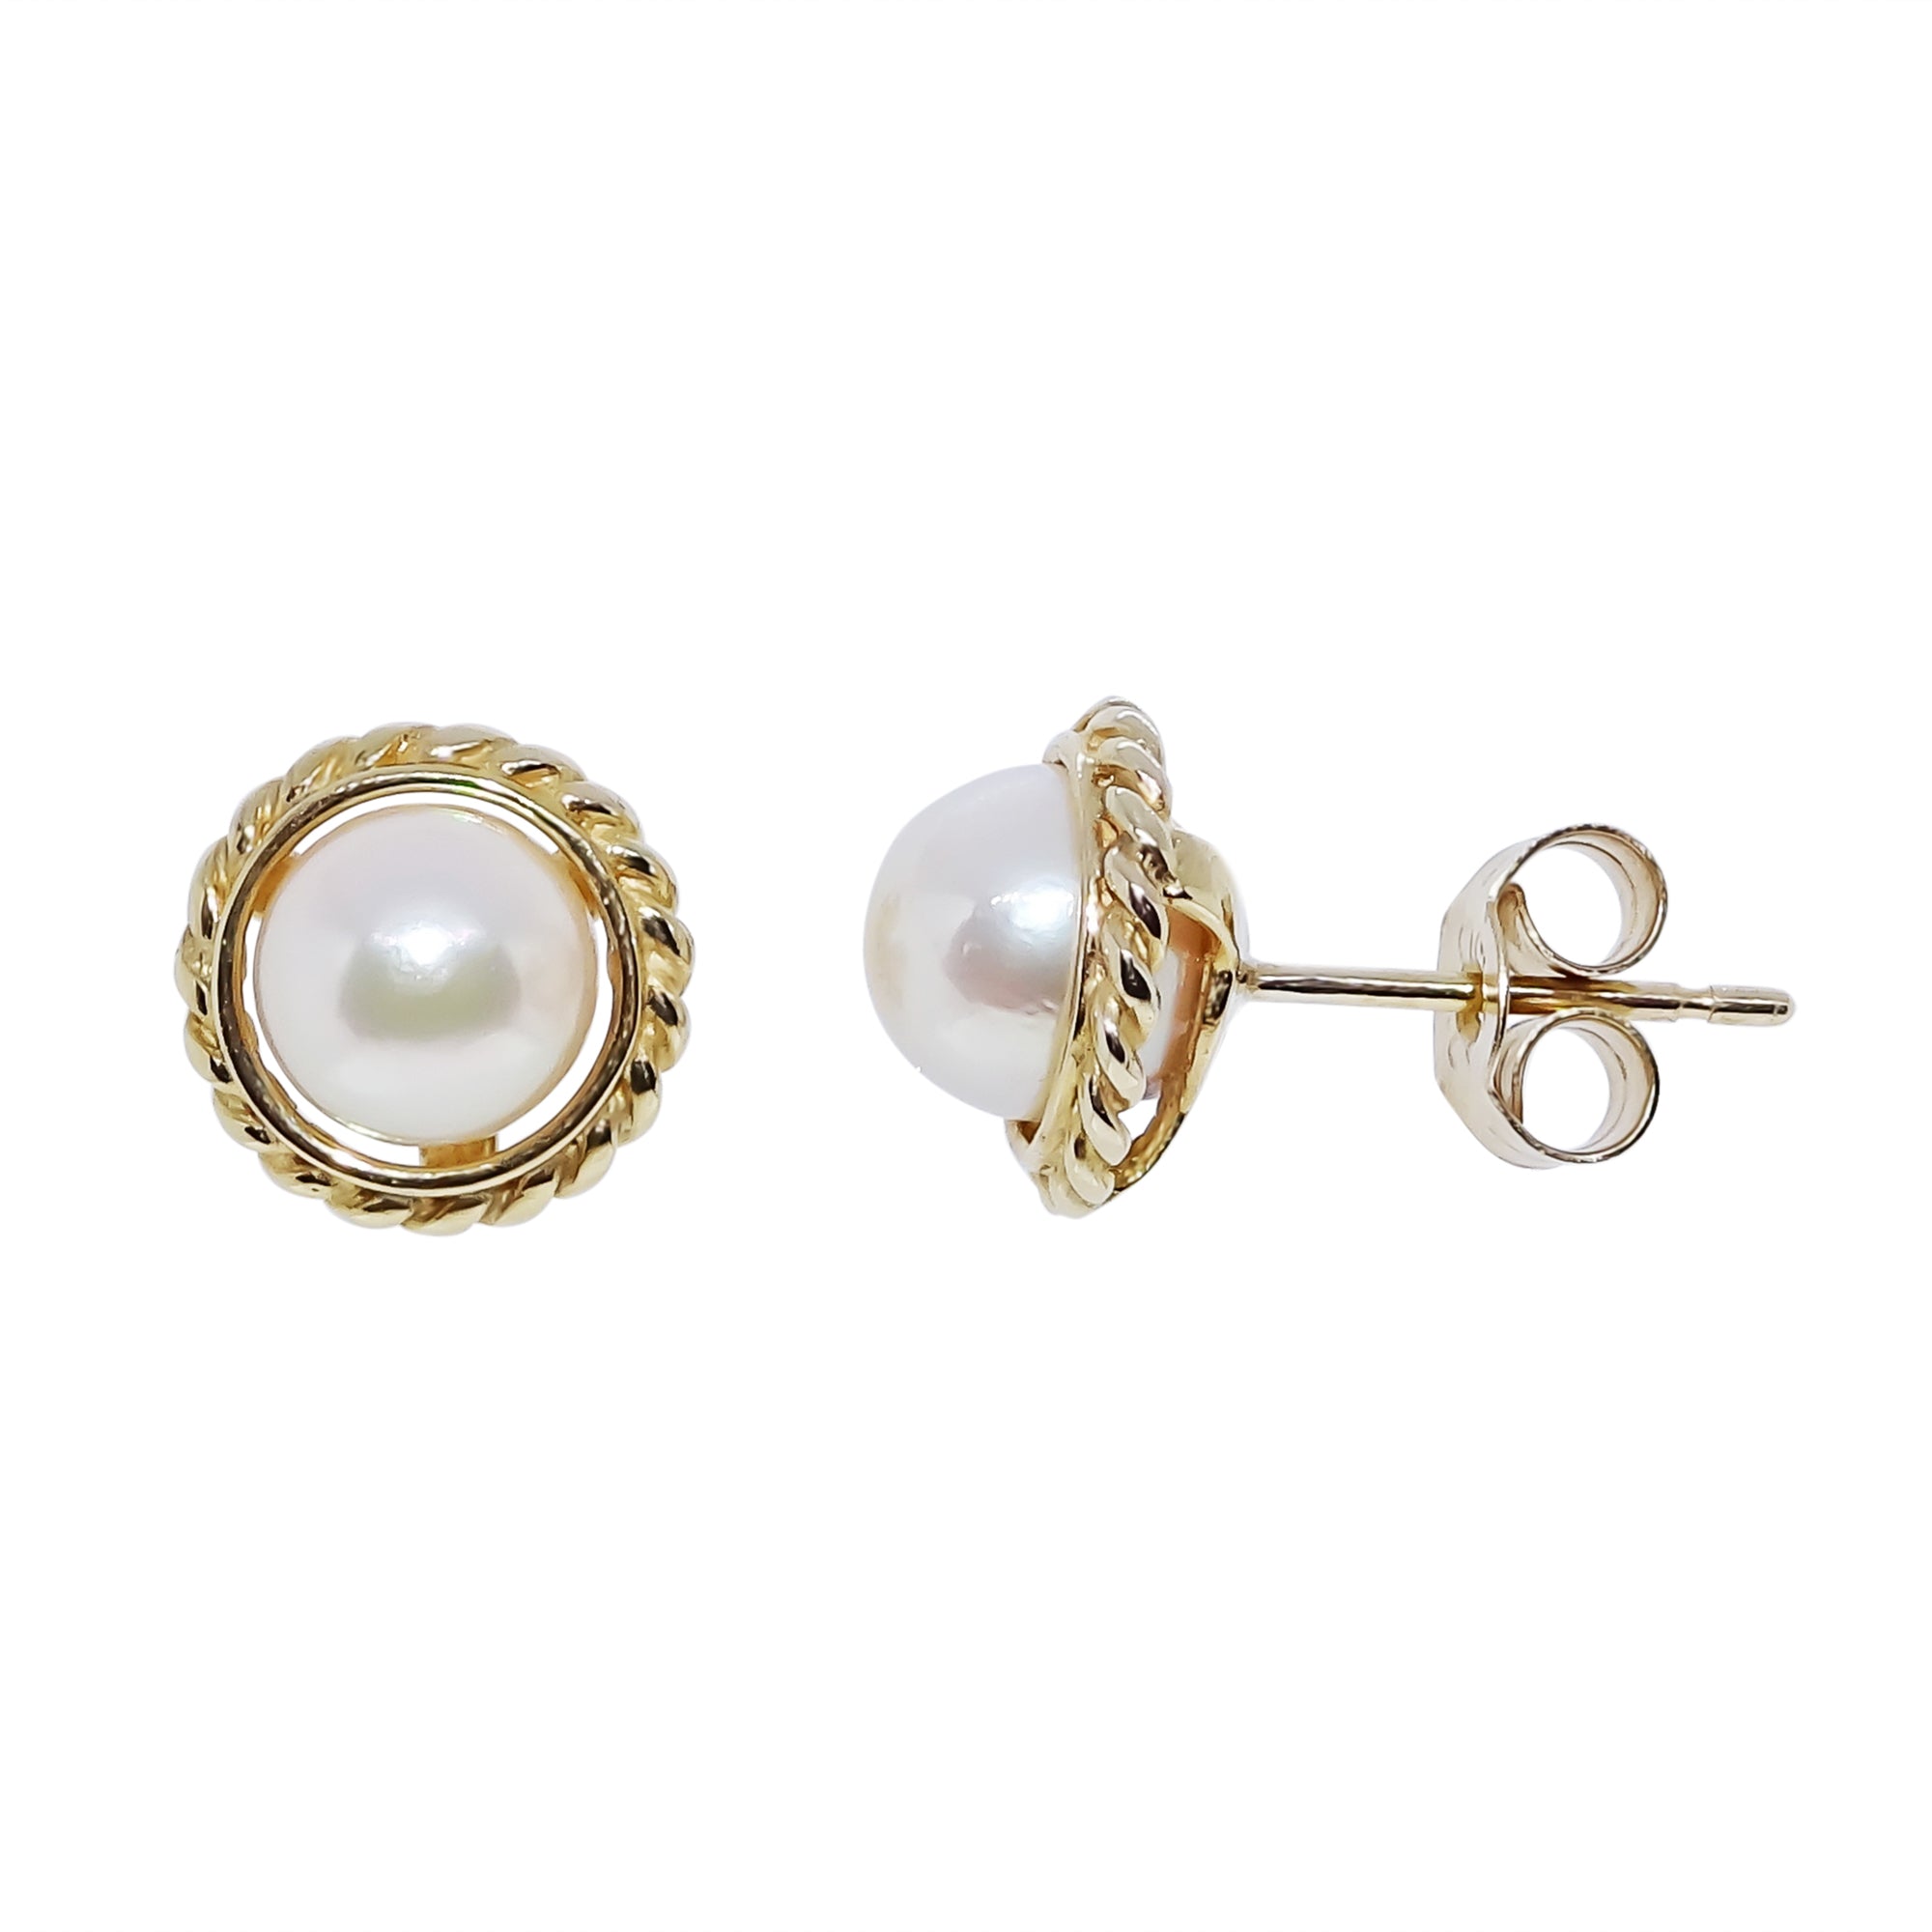 9ct gold 6mm cultured pearl beaded studs earrings